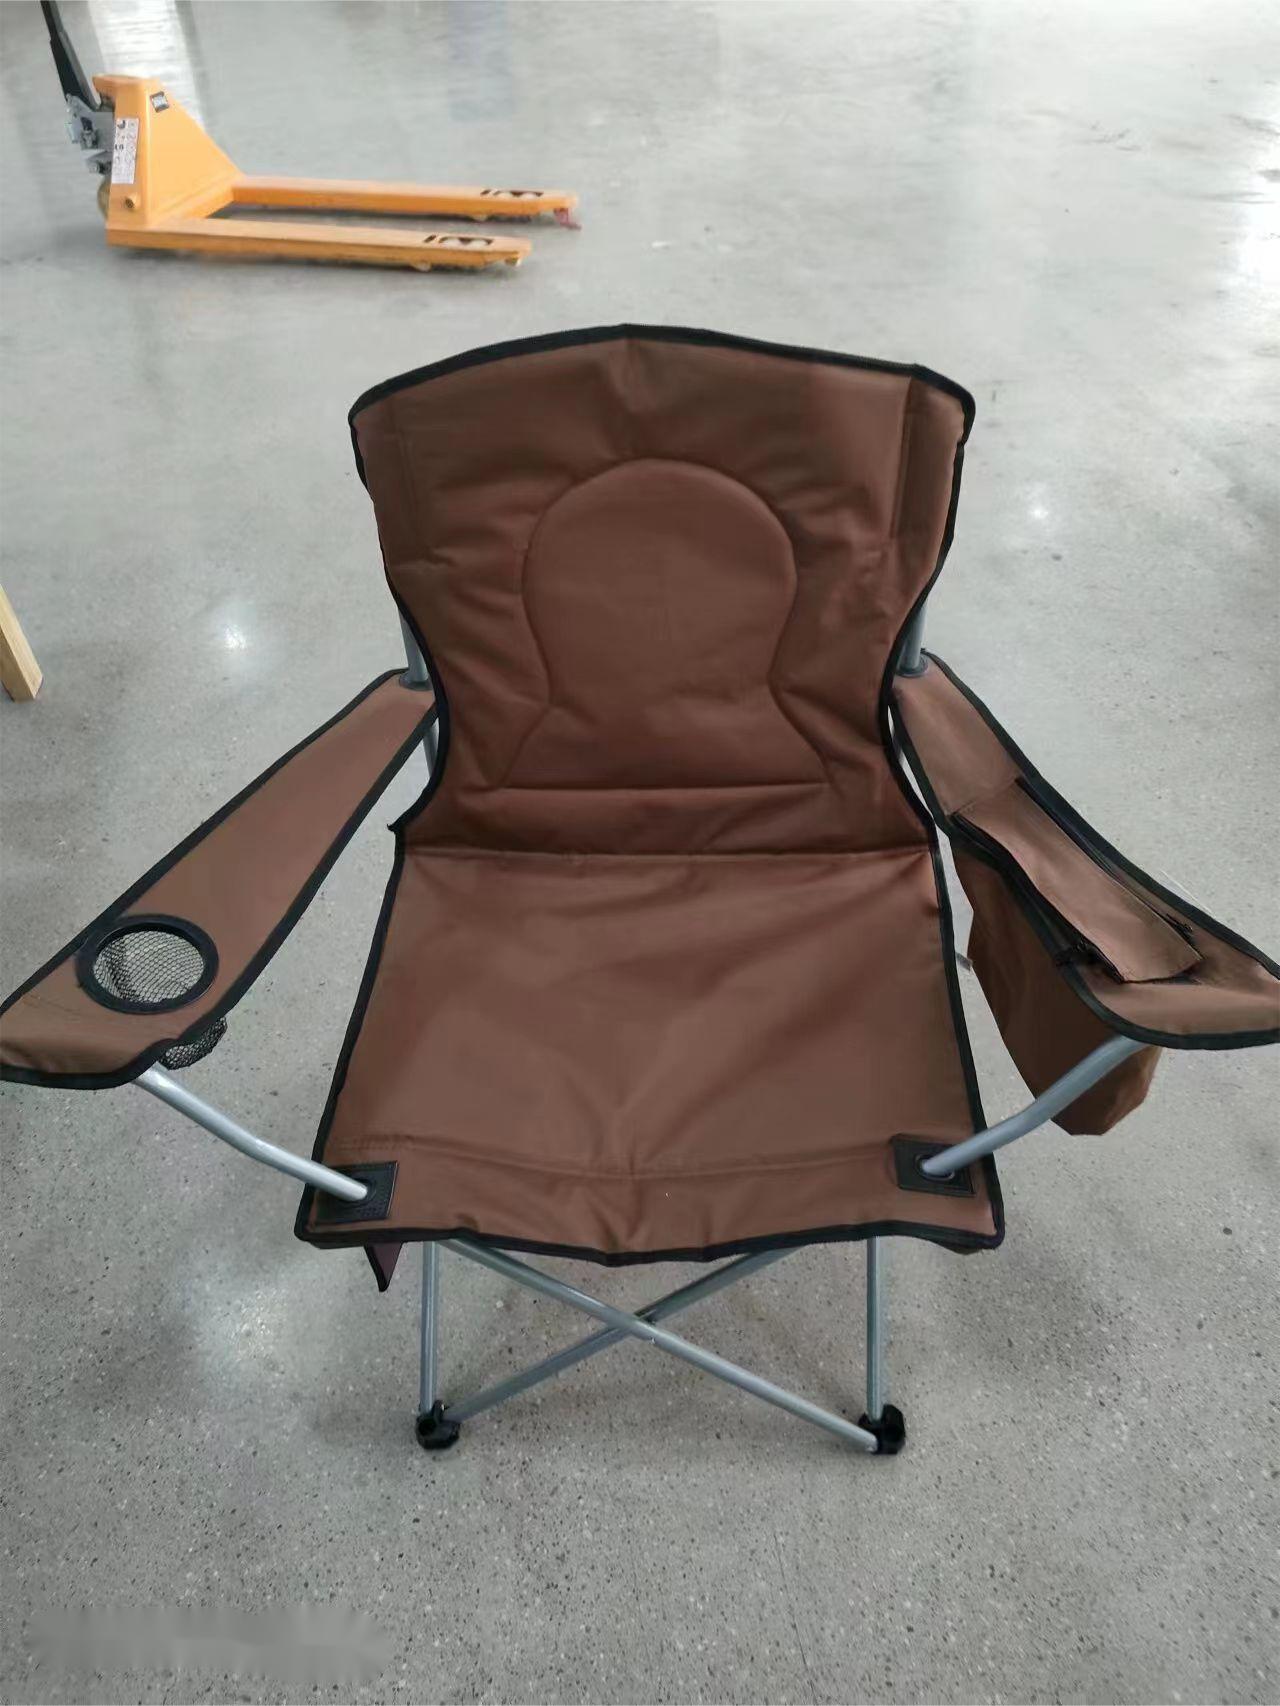 Paded Camping Foldable Chair With Cooler & Storage Bag Mande in China